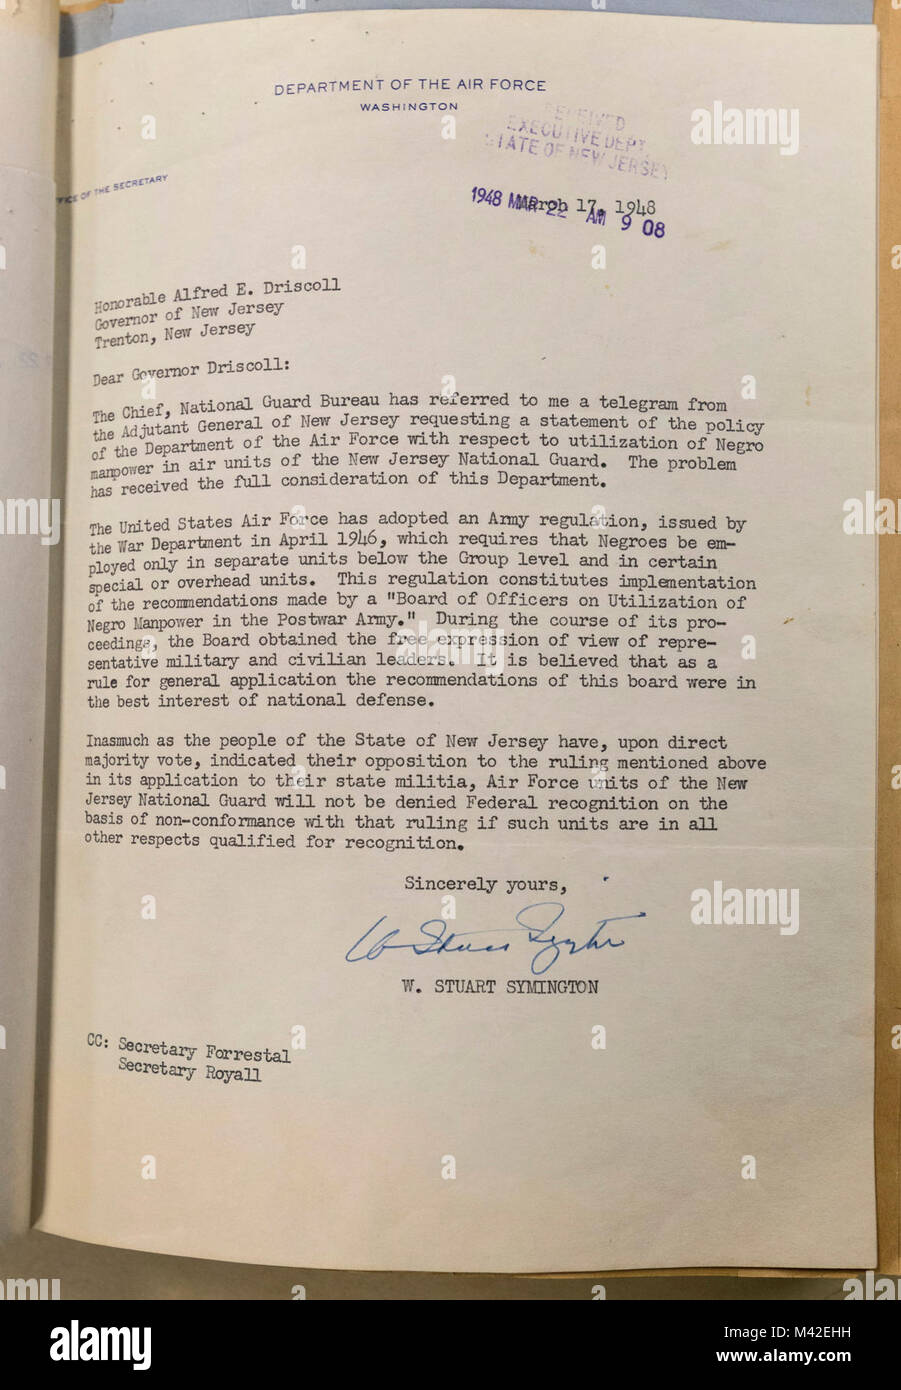 Letter from W. Stuart Symington, Secretary of the Air Force, sent to New Jersey Governor Alfred E. Driscoll on March 17, 1948, authorizing racially mixed units in the New Jersey Air National Guard. This made the New Jersey National Guard the first federally recognized military component to be integrated. (New Jersey National Guard Stock Photo